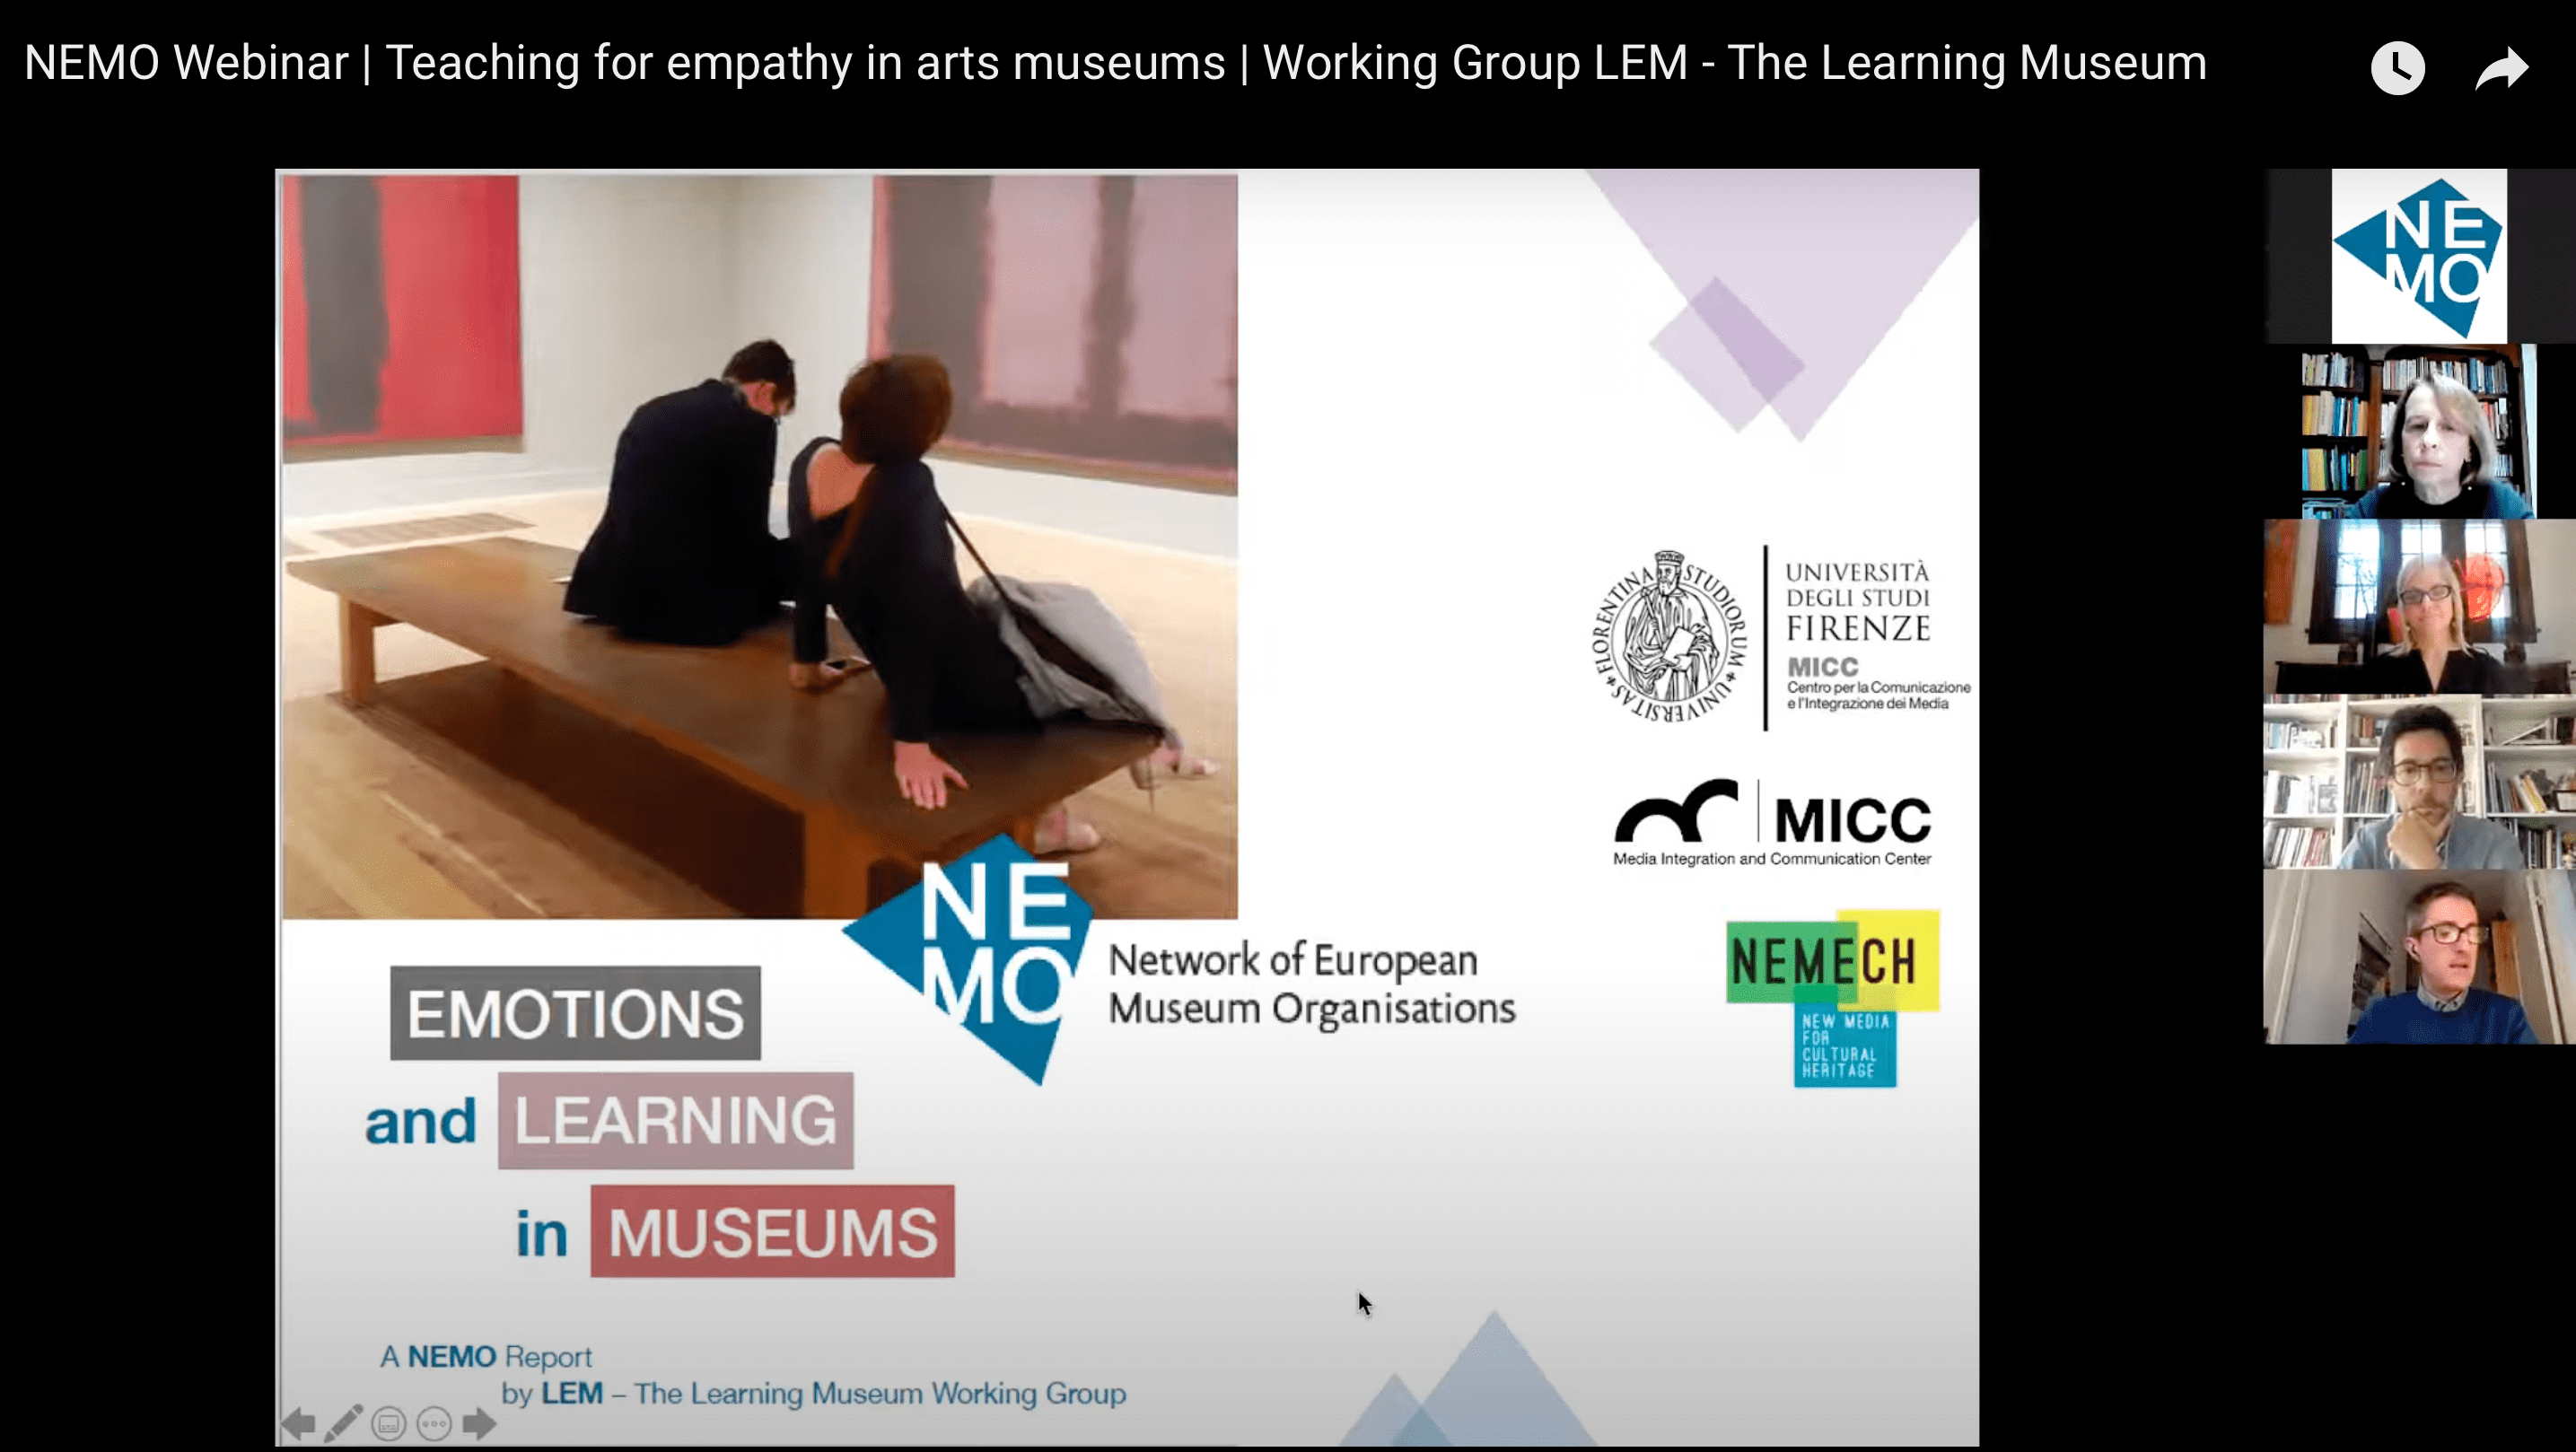 “Emotions and learning in museums” at NEMO Webinar